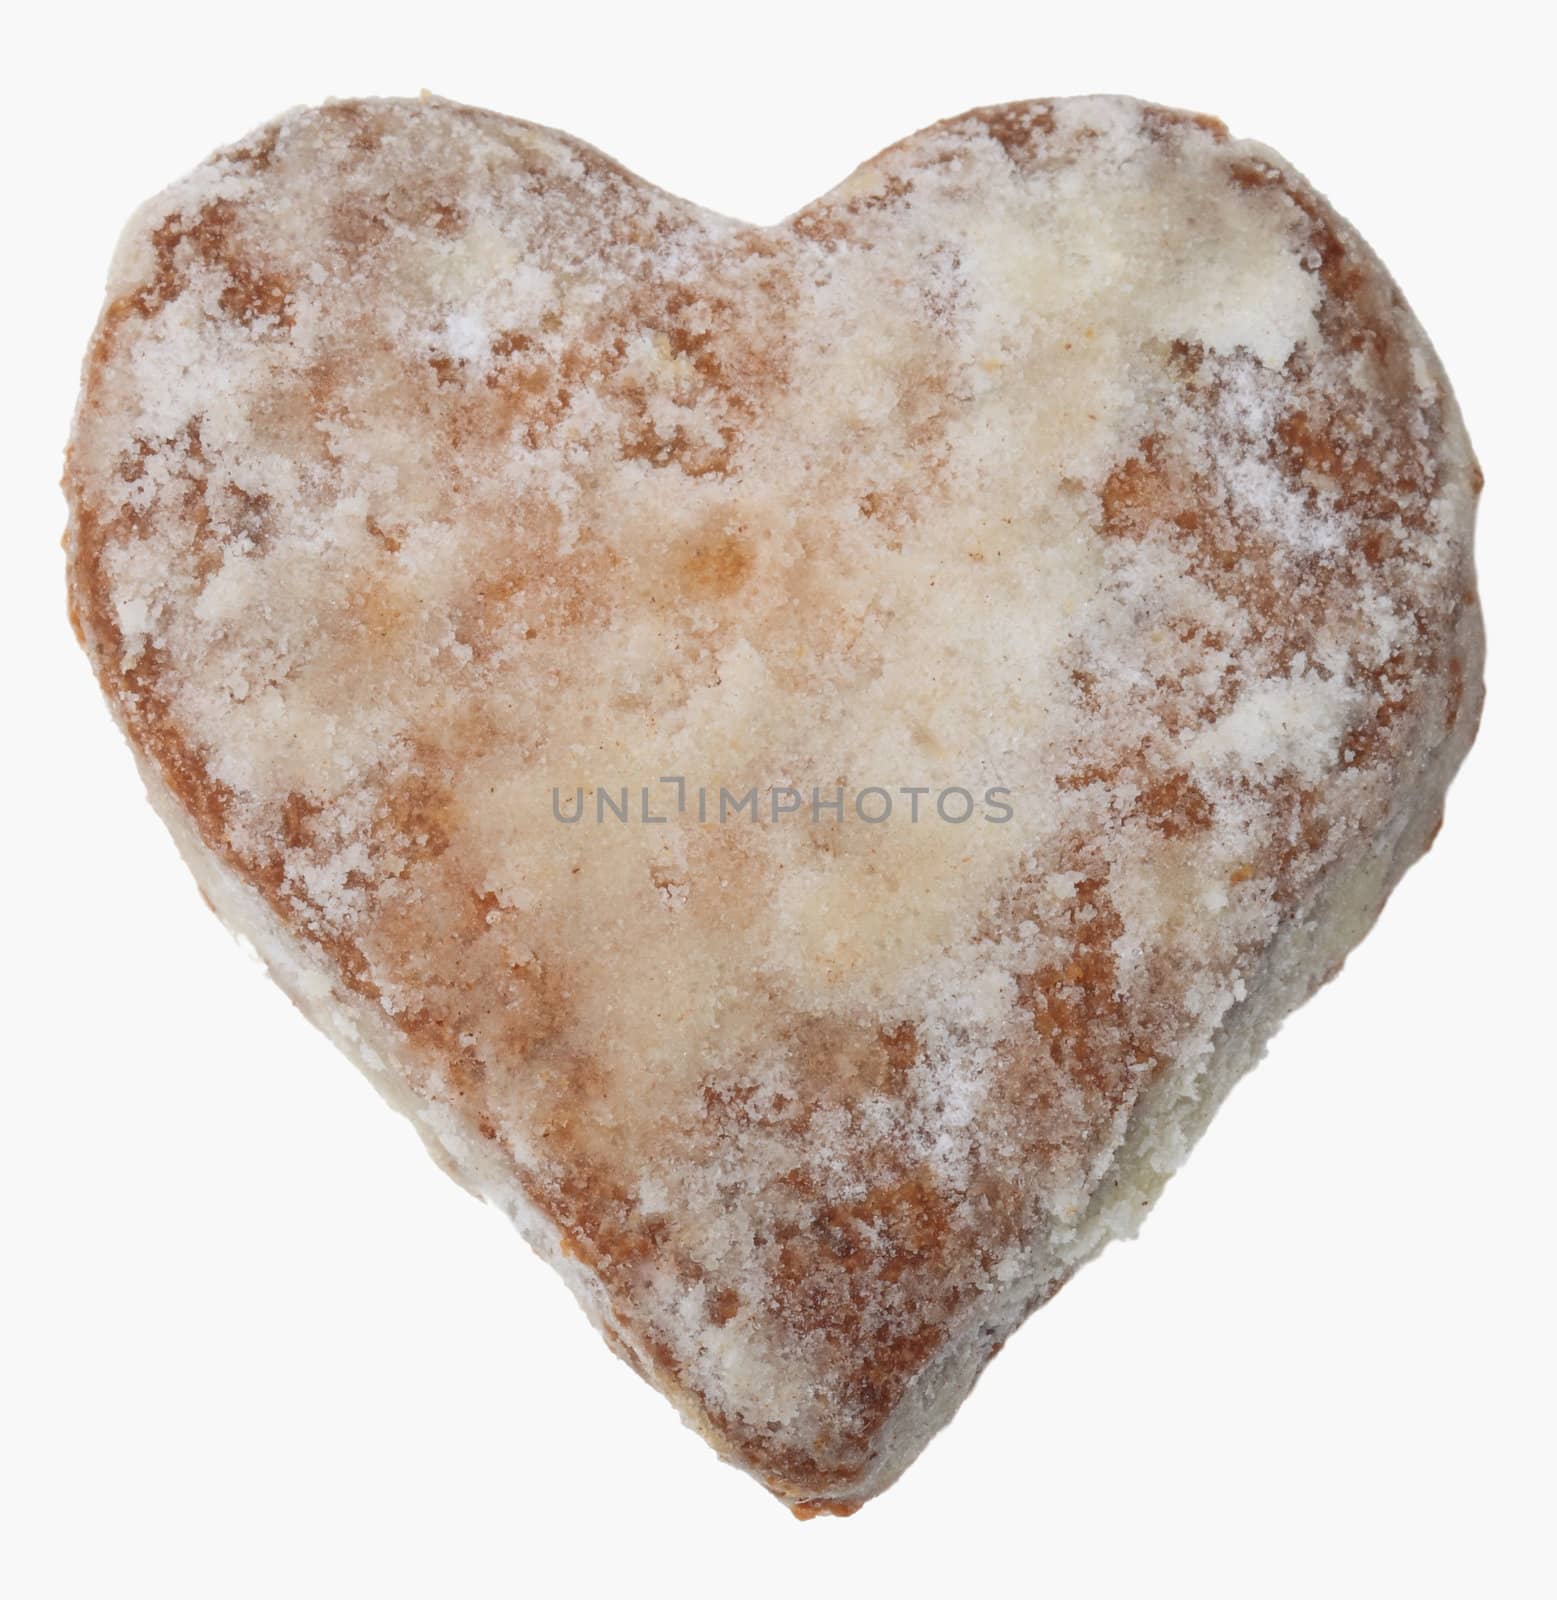 Heart shaped ginger biscuit covered in sugar isolated against a white background.